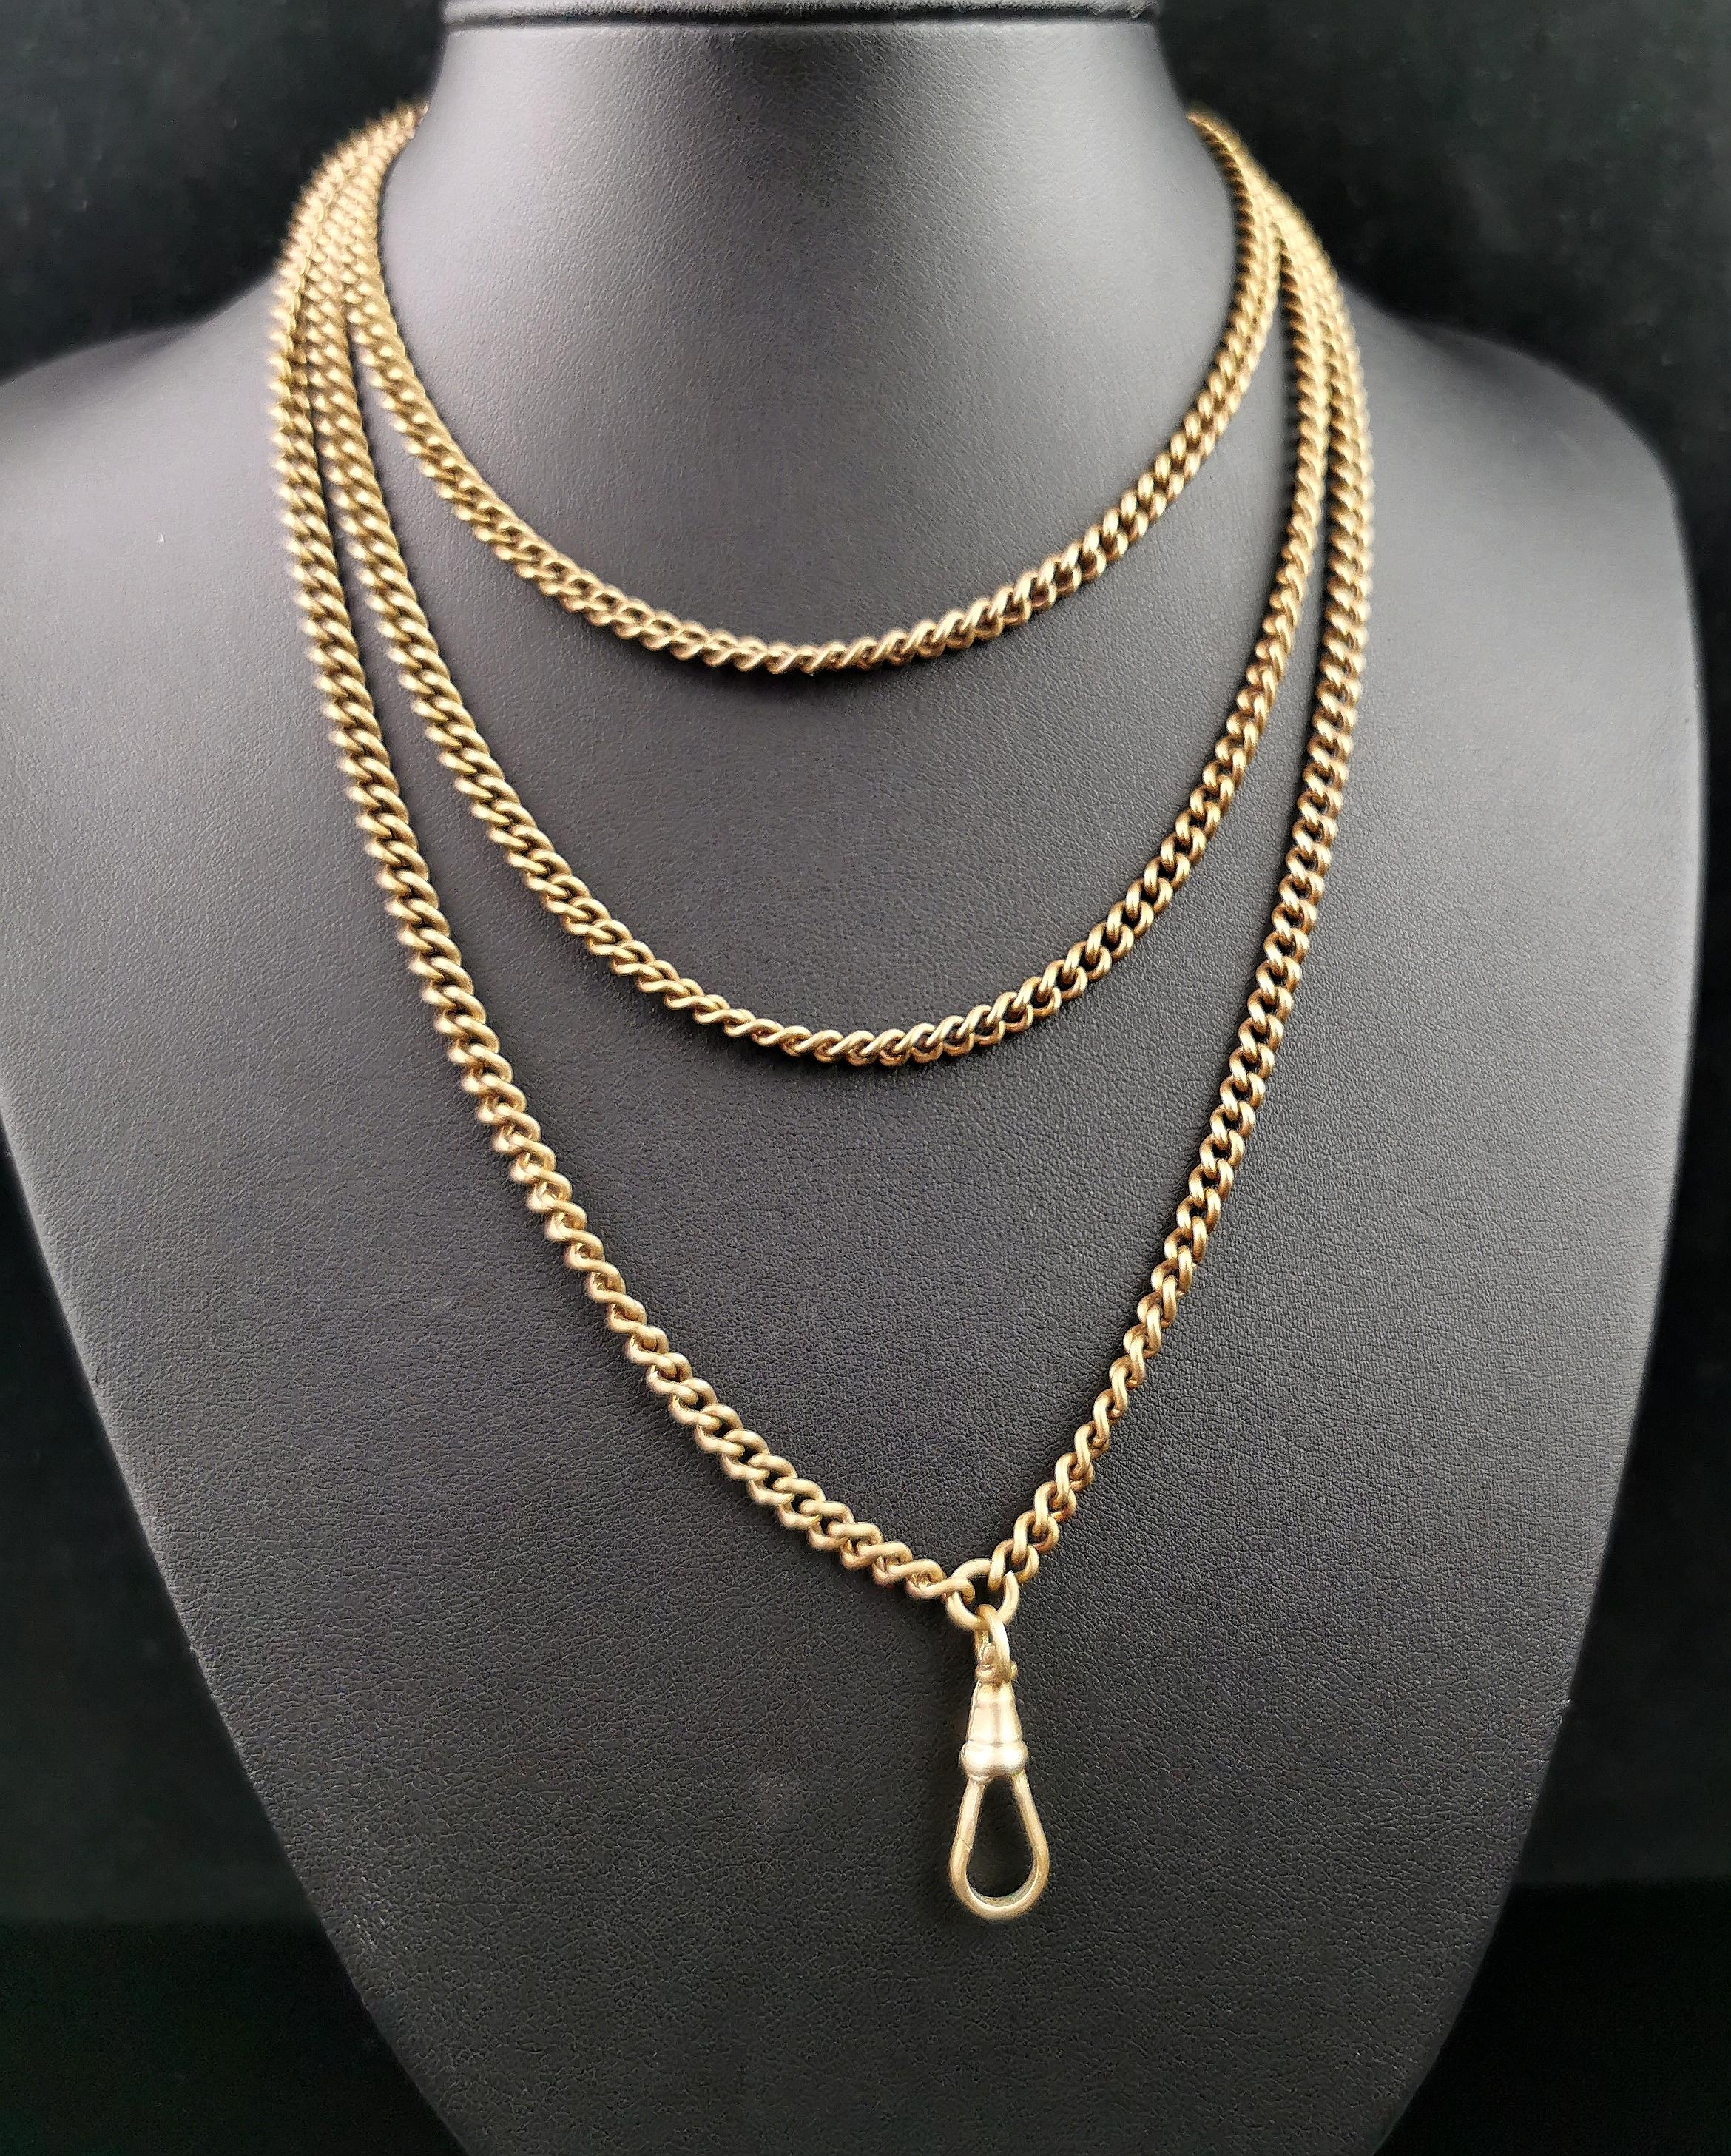 Antique Victorian longuard chain necklace, Gold plated, Curb link  9